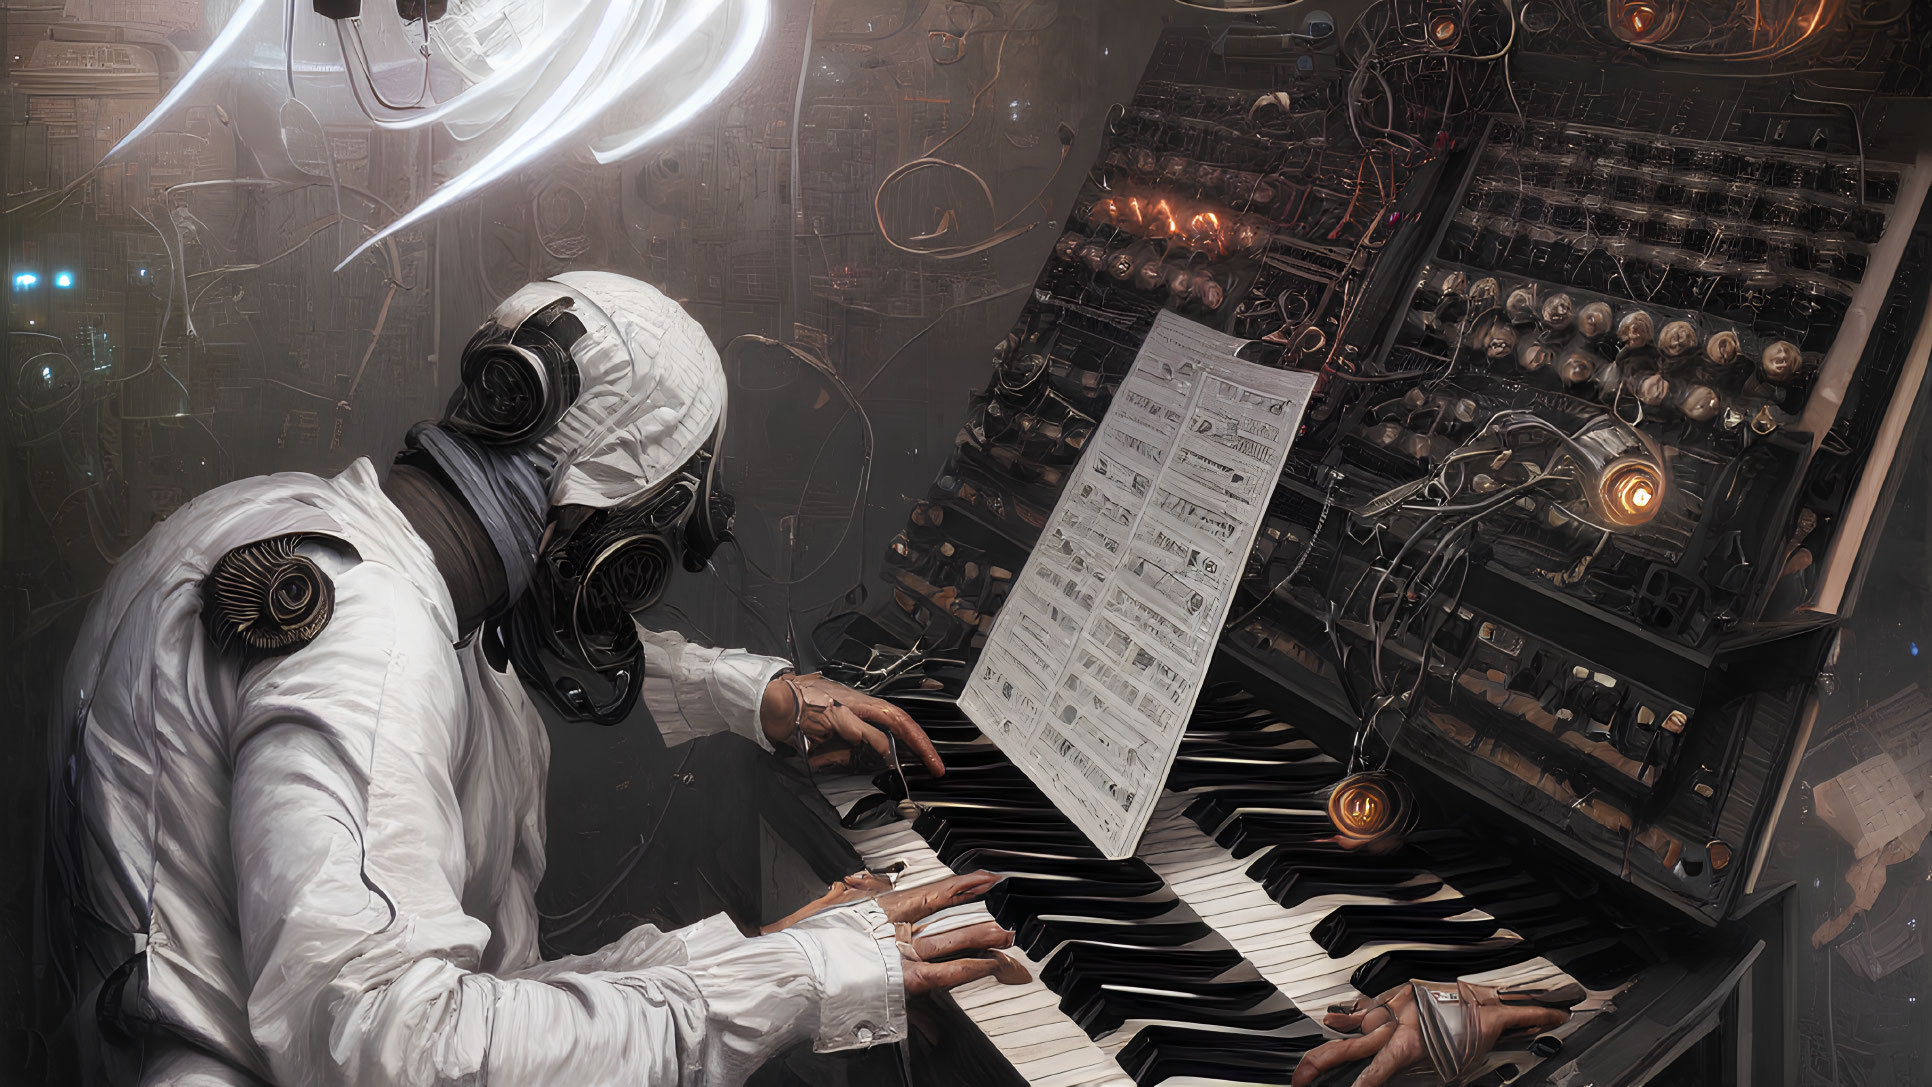 Futuristic individual in white hazmat suit playing piano surrounded by machinery and lights